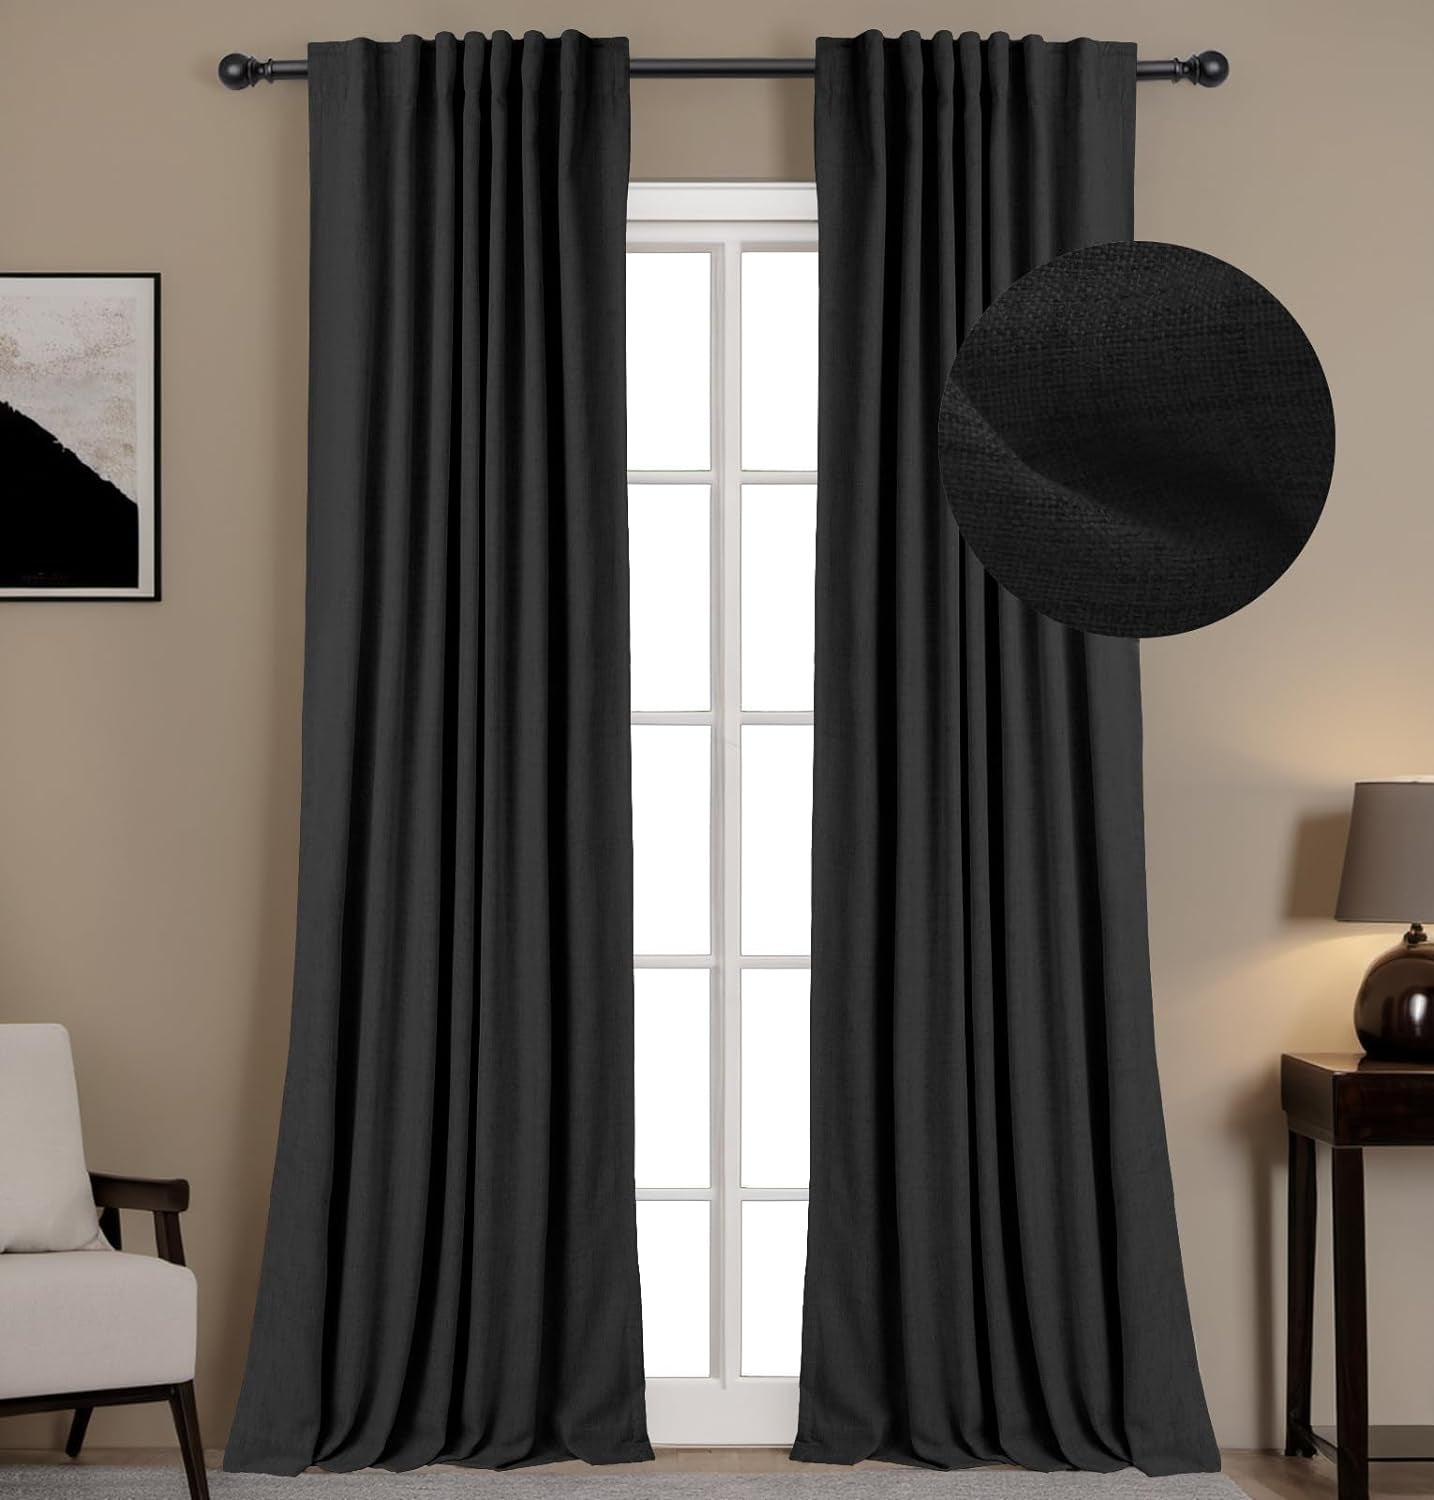 INOVADAY 100% Blackout Curtains 96 Inches Long 2 Panels Set, Thermal Insulated Linen Blackout Curtains for Bedroom, Back Tab/Rod Pocket Curtains & Drapes for Living Room - Beige, W50 X L96  INOVADAY 12 Black 50''W X 84''L 